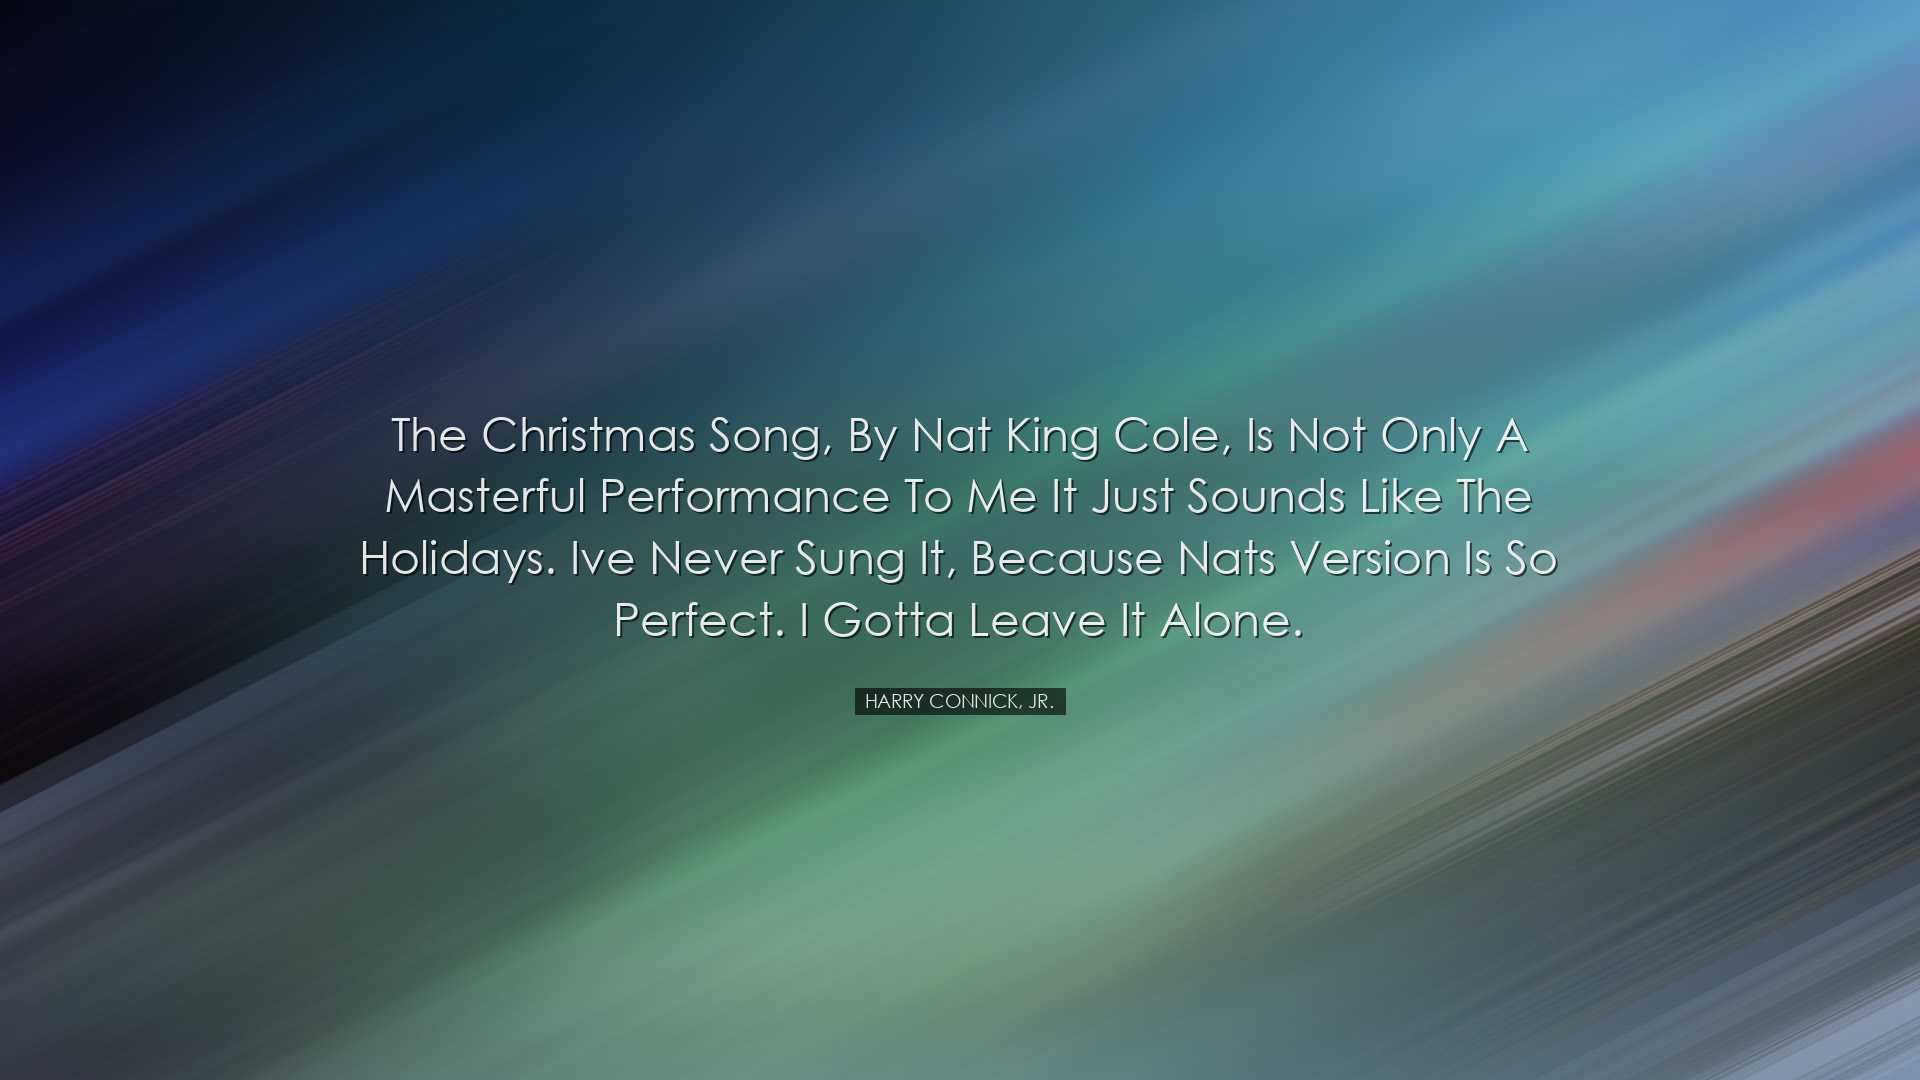 The Christmas Song, by Nat King Cole, is not only a masterful perf